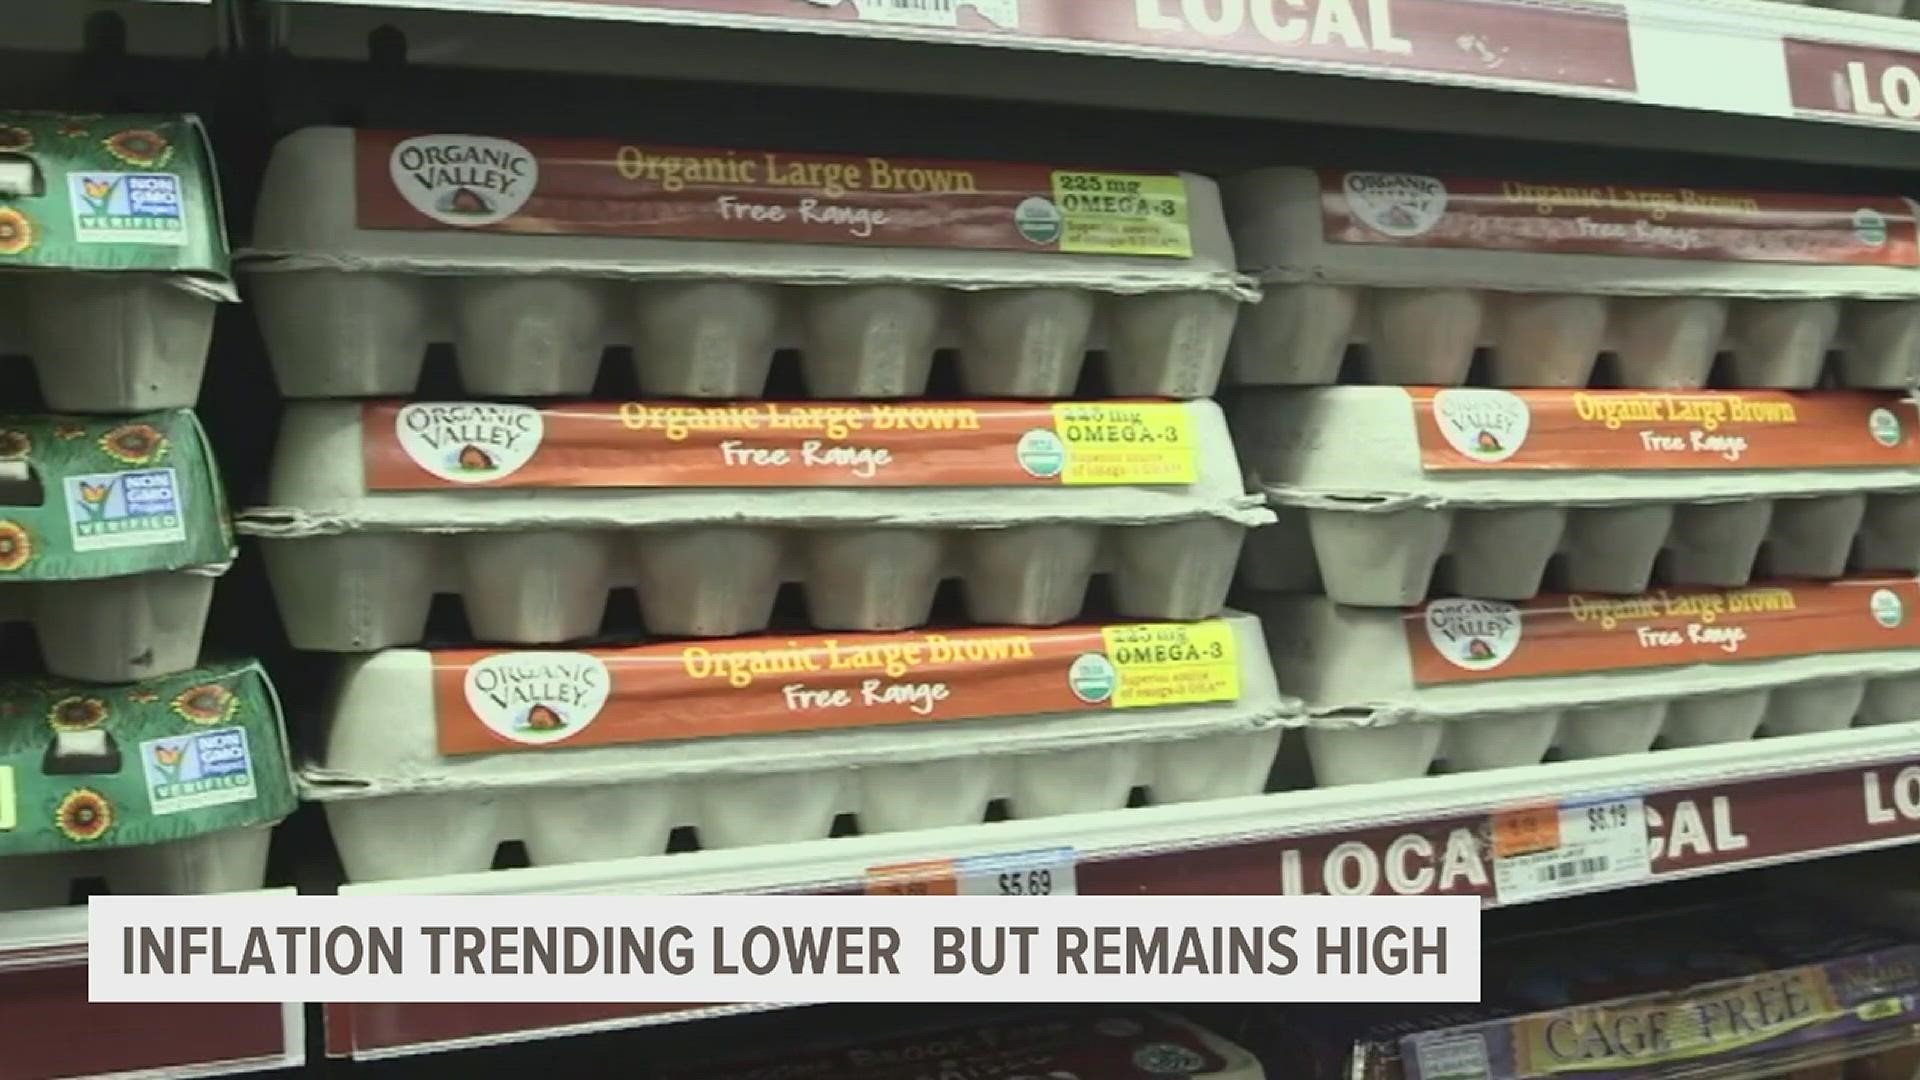 In the week leading up to Christmas, the average price for eggs was 267% higher than it was at the beginning of 2022, according to the USDA.